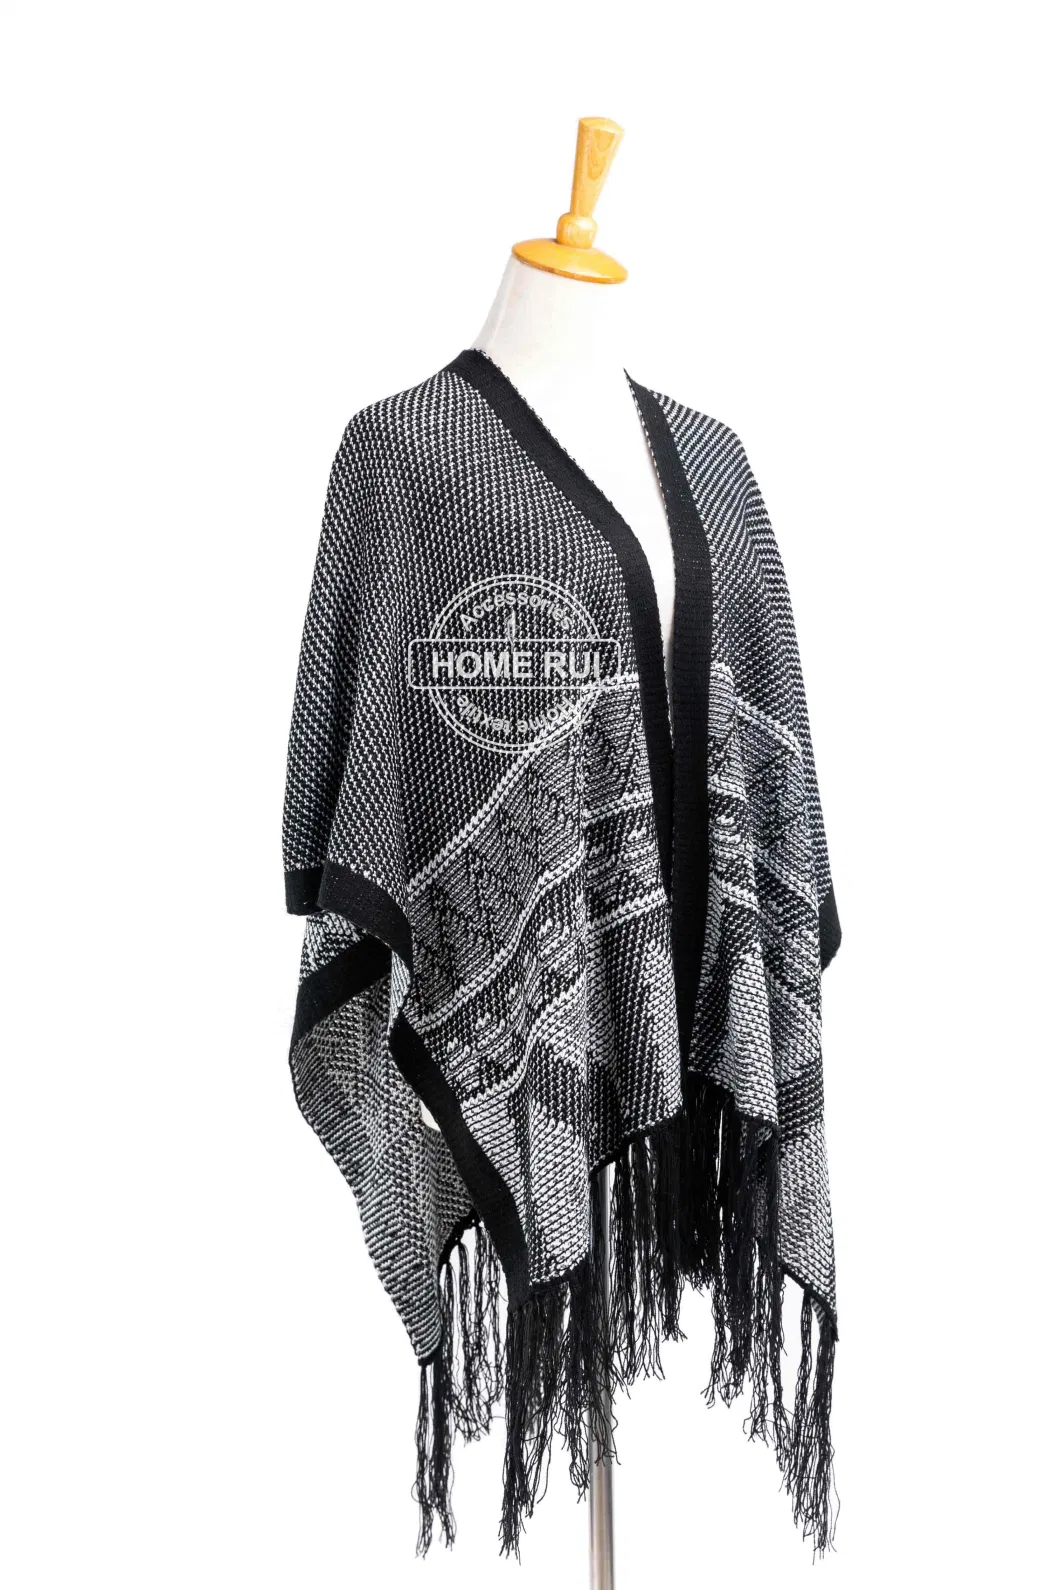 Supplier Outfit Fall Winter Lady Fashion Plus Batwing Irregualar Shape Reversible Tassel Cozy Fluffy Chunky Sweater Boat V-Neck Black Blanket Poncho Pallium